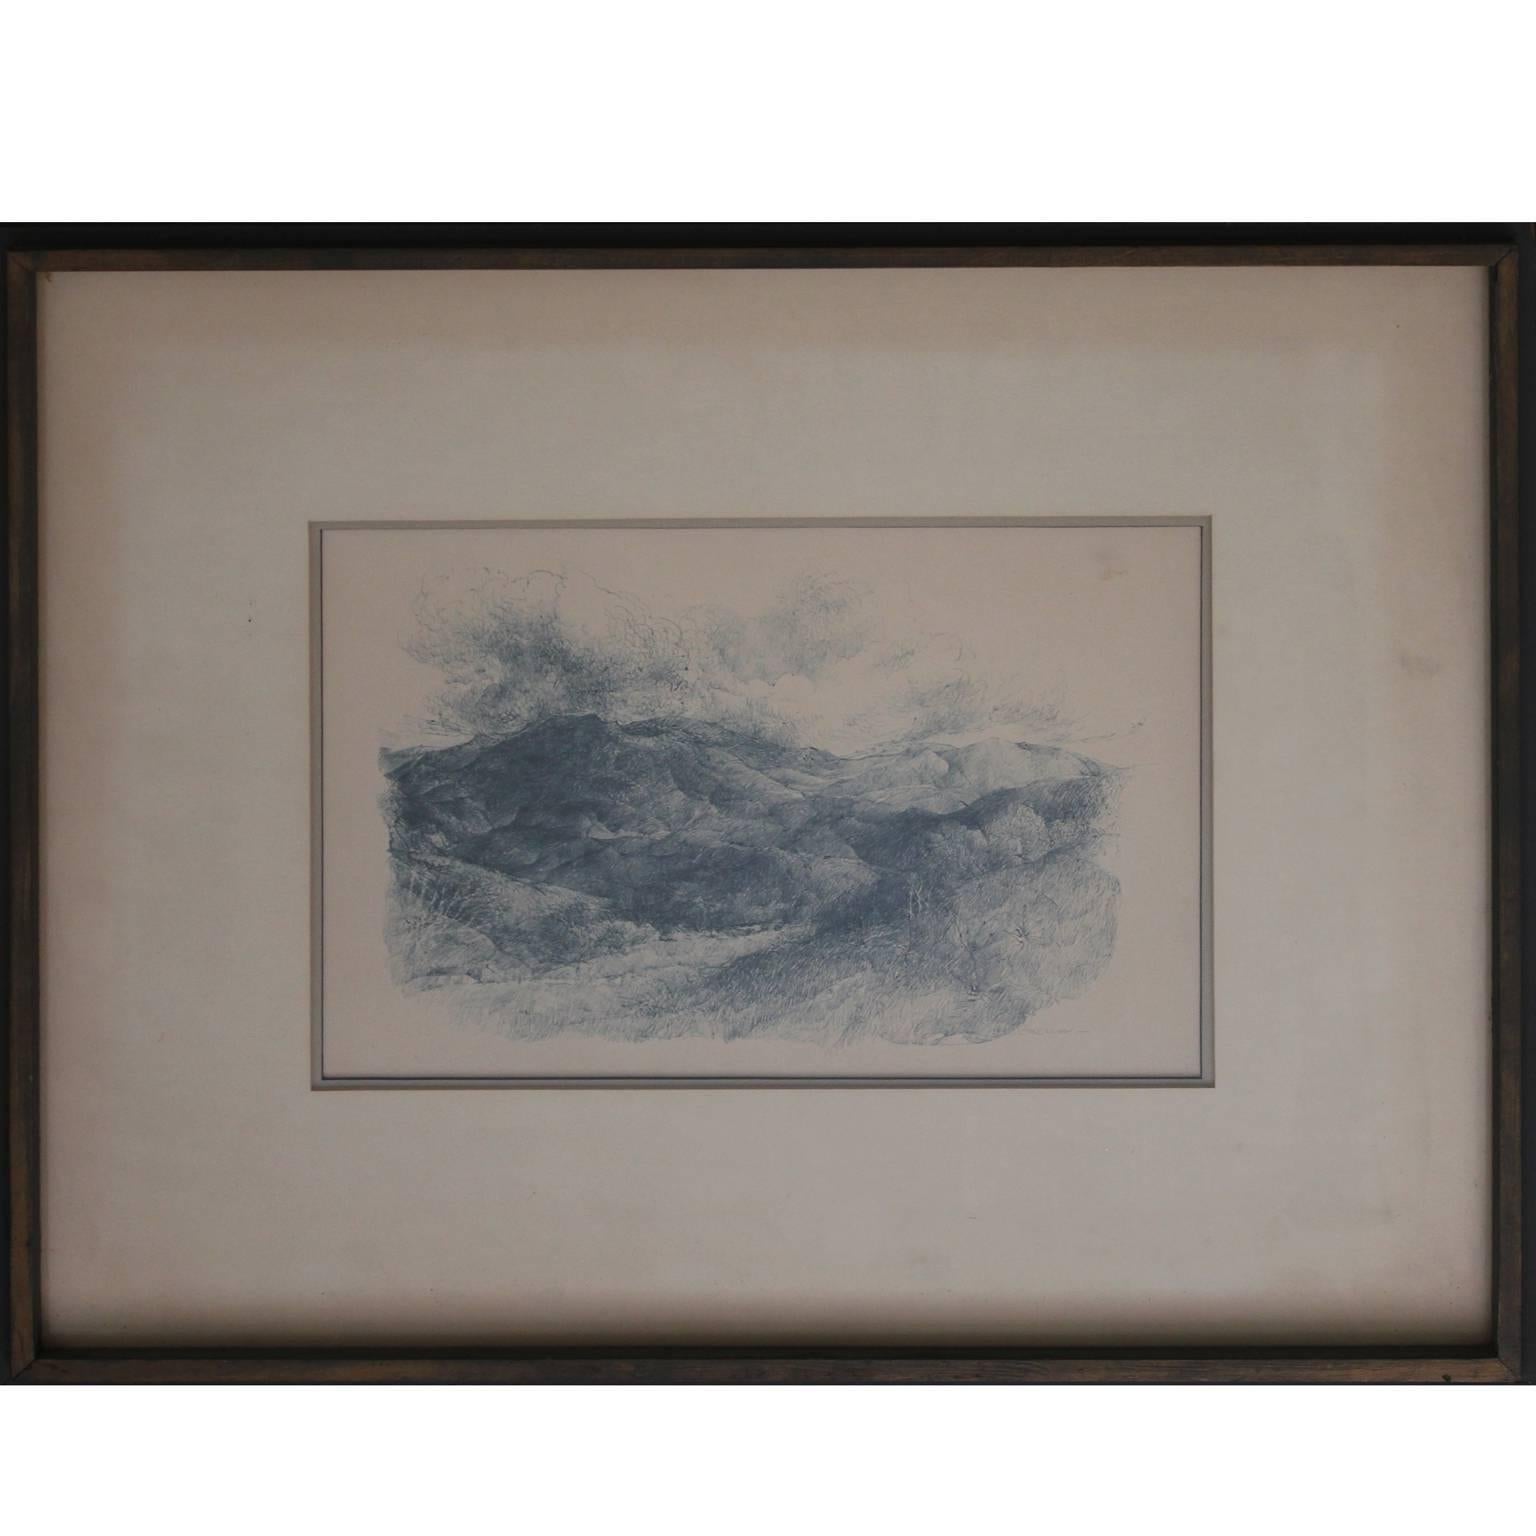 "Mexican Landscape" Early Landscape Drawing - Art by John William Guerin